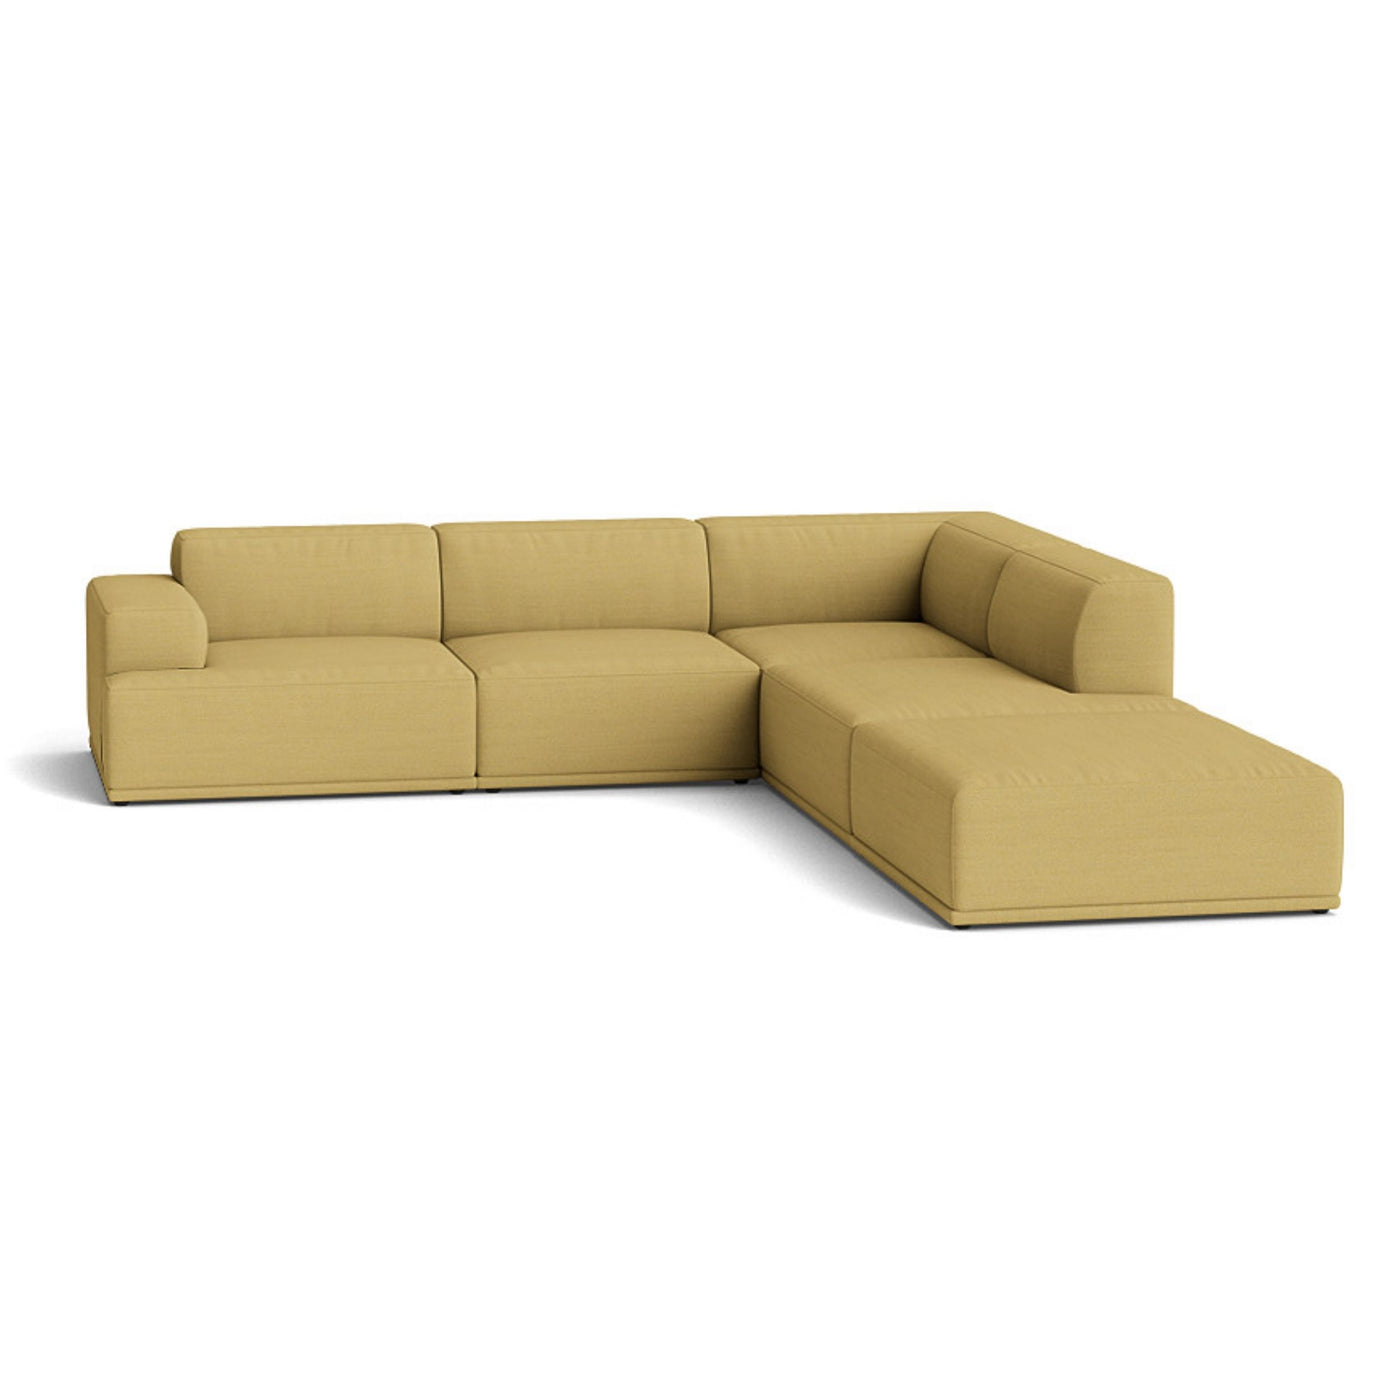 Muuto Connect Soft Modular Corner Sofa, configuration 2. Made-to-order from someday designs. #colour_hallingdal-407